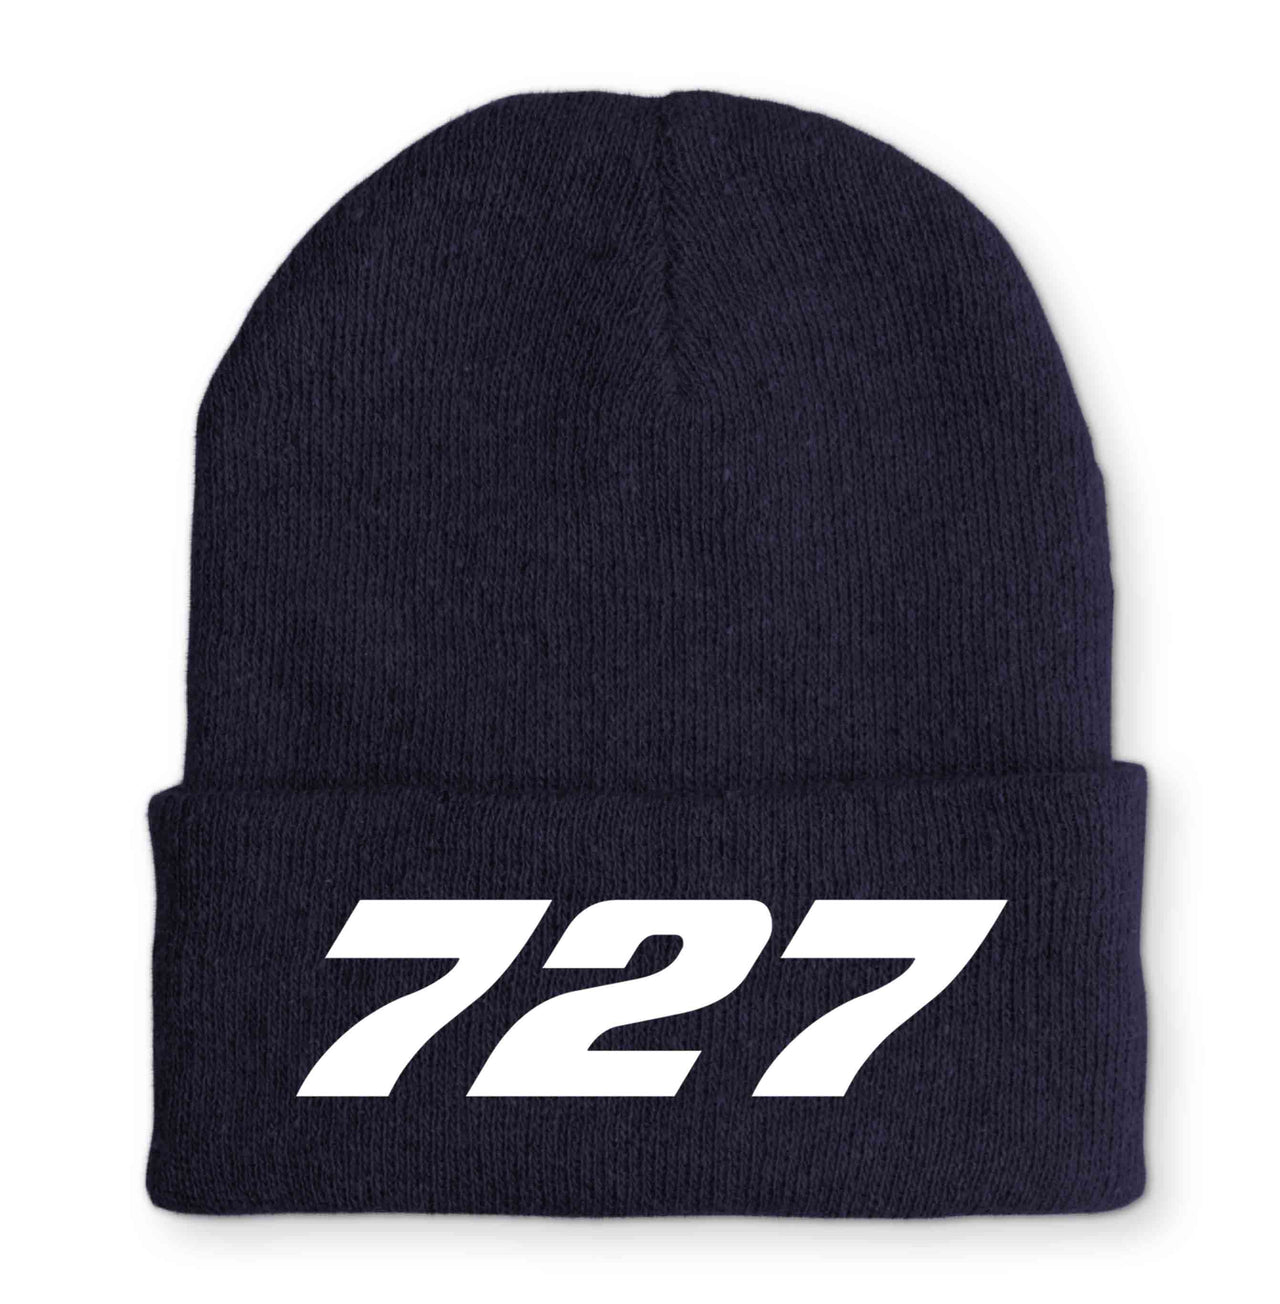 727 Flat Text Embroidered Beanies